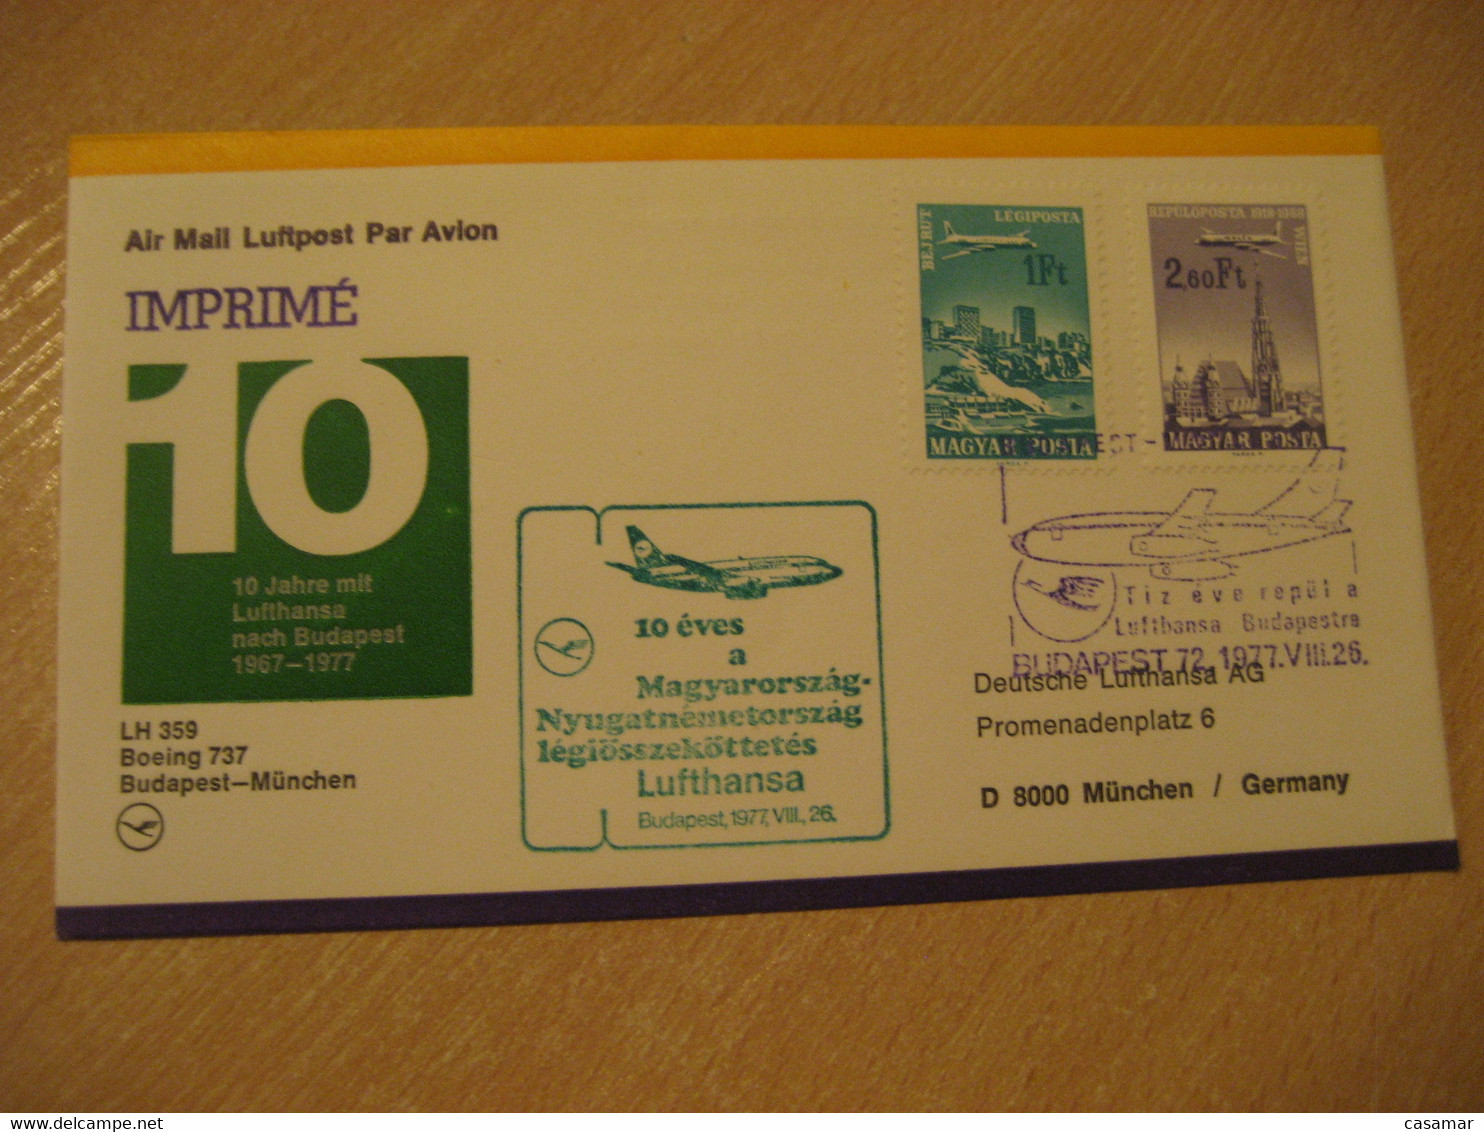 BUDAPEST Munchen 1977 Lufthansa Airlines Airline Boeing 737 First Flight Green Cancel Cover HUNGARY GERMANY - Covers & Documents